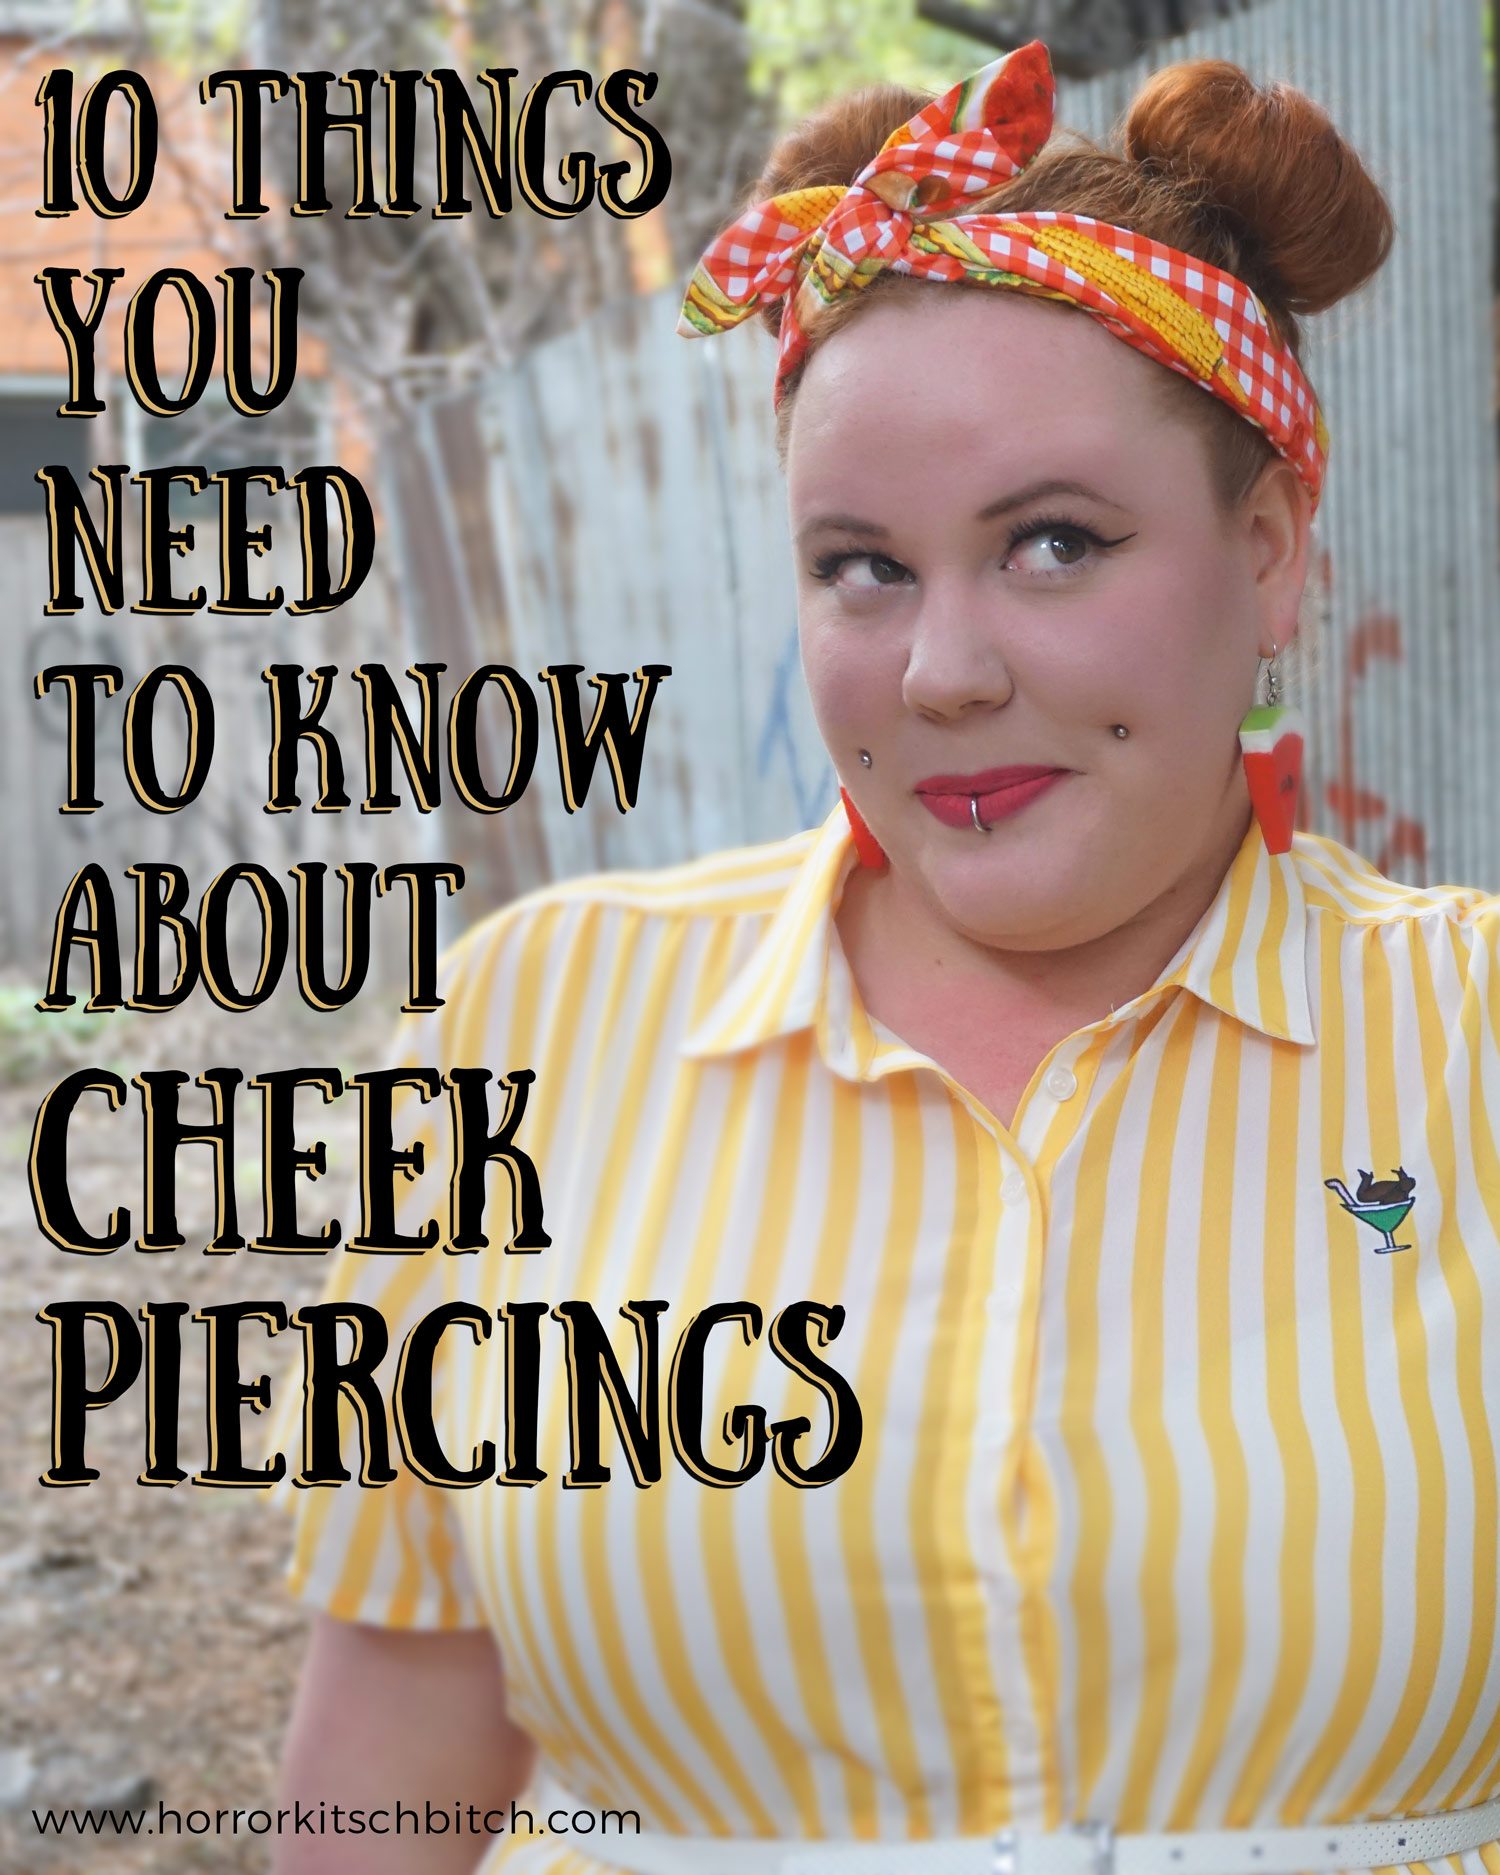 Kobi Jae of Horror Kitsch Bitch - 10 Things You Need to Know About Cheek Piercings - Advice about Dimple Piercings